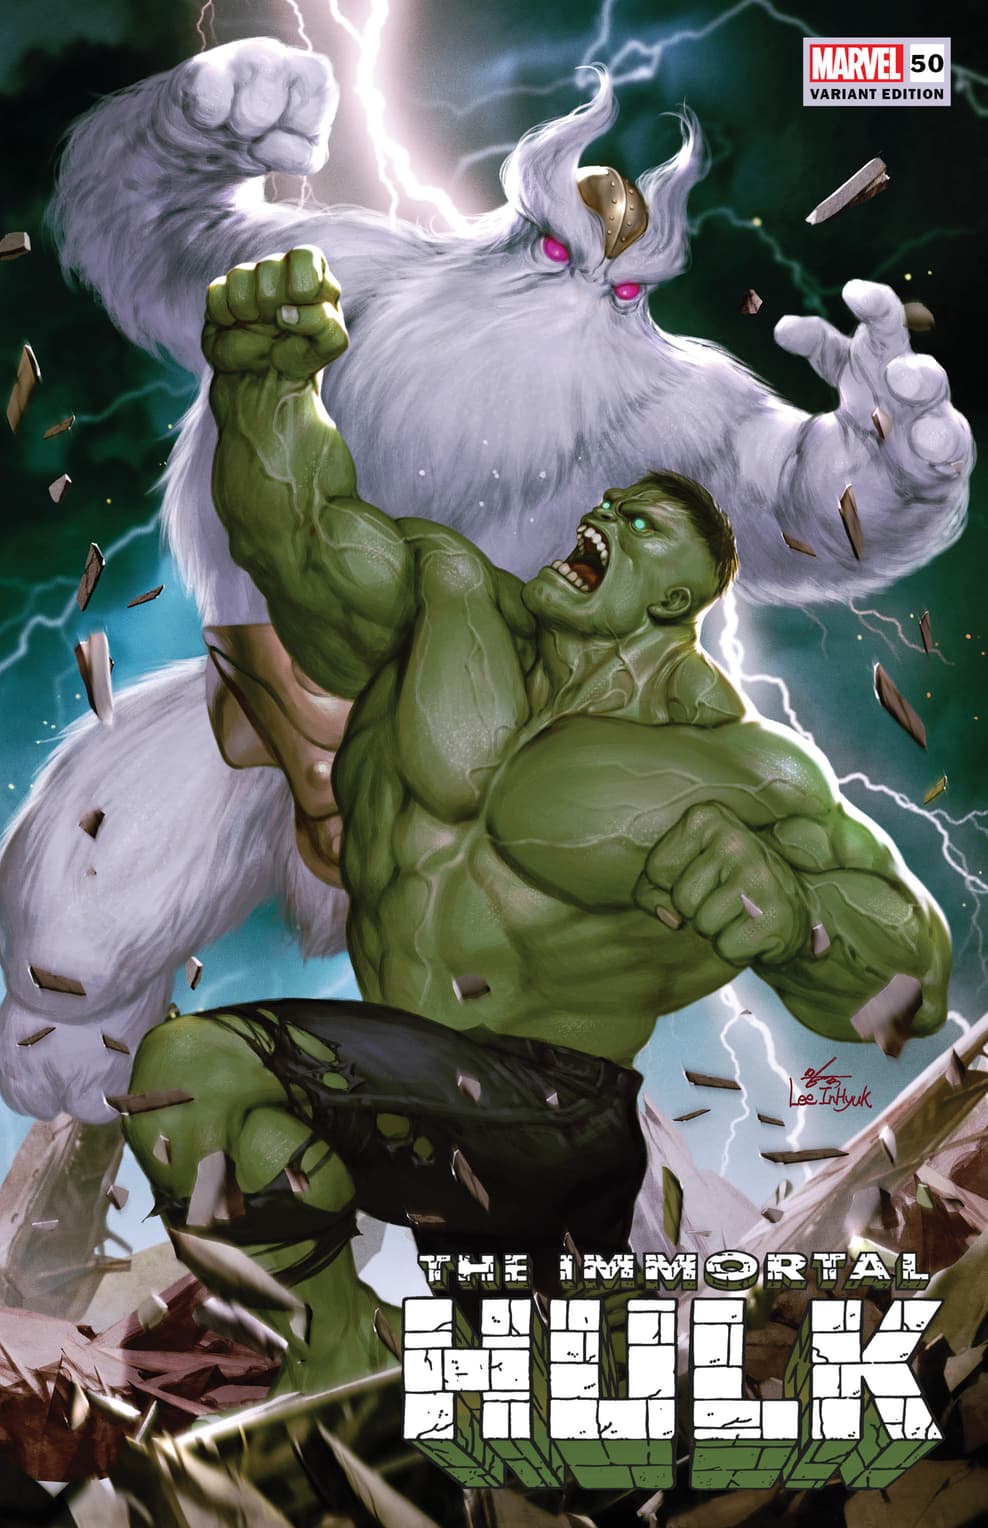 Immortal Hulk #50 Immortal Moments Variant Cover by InHyuk Lee